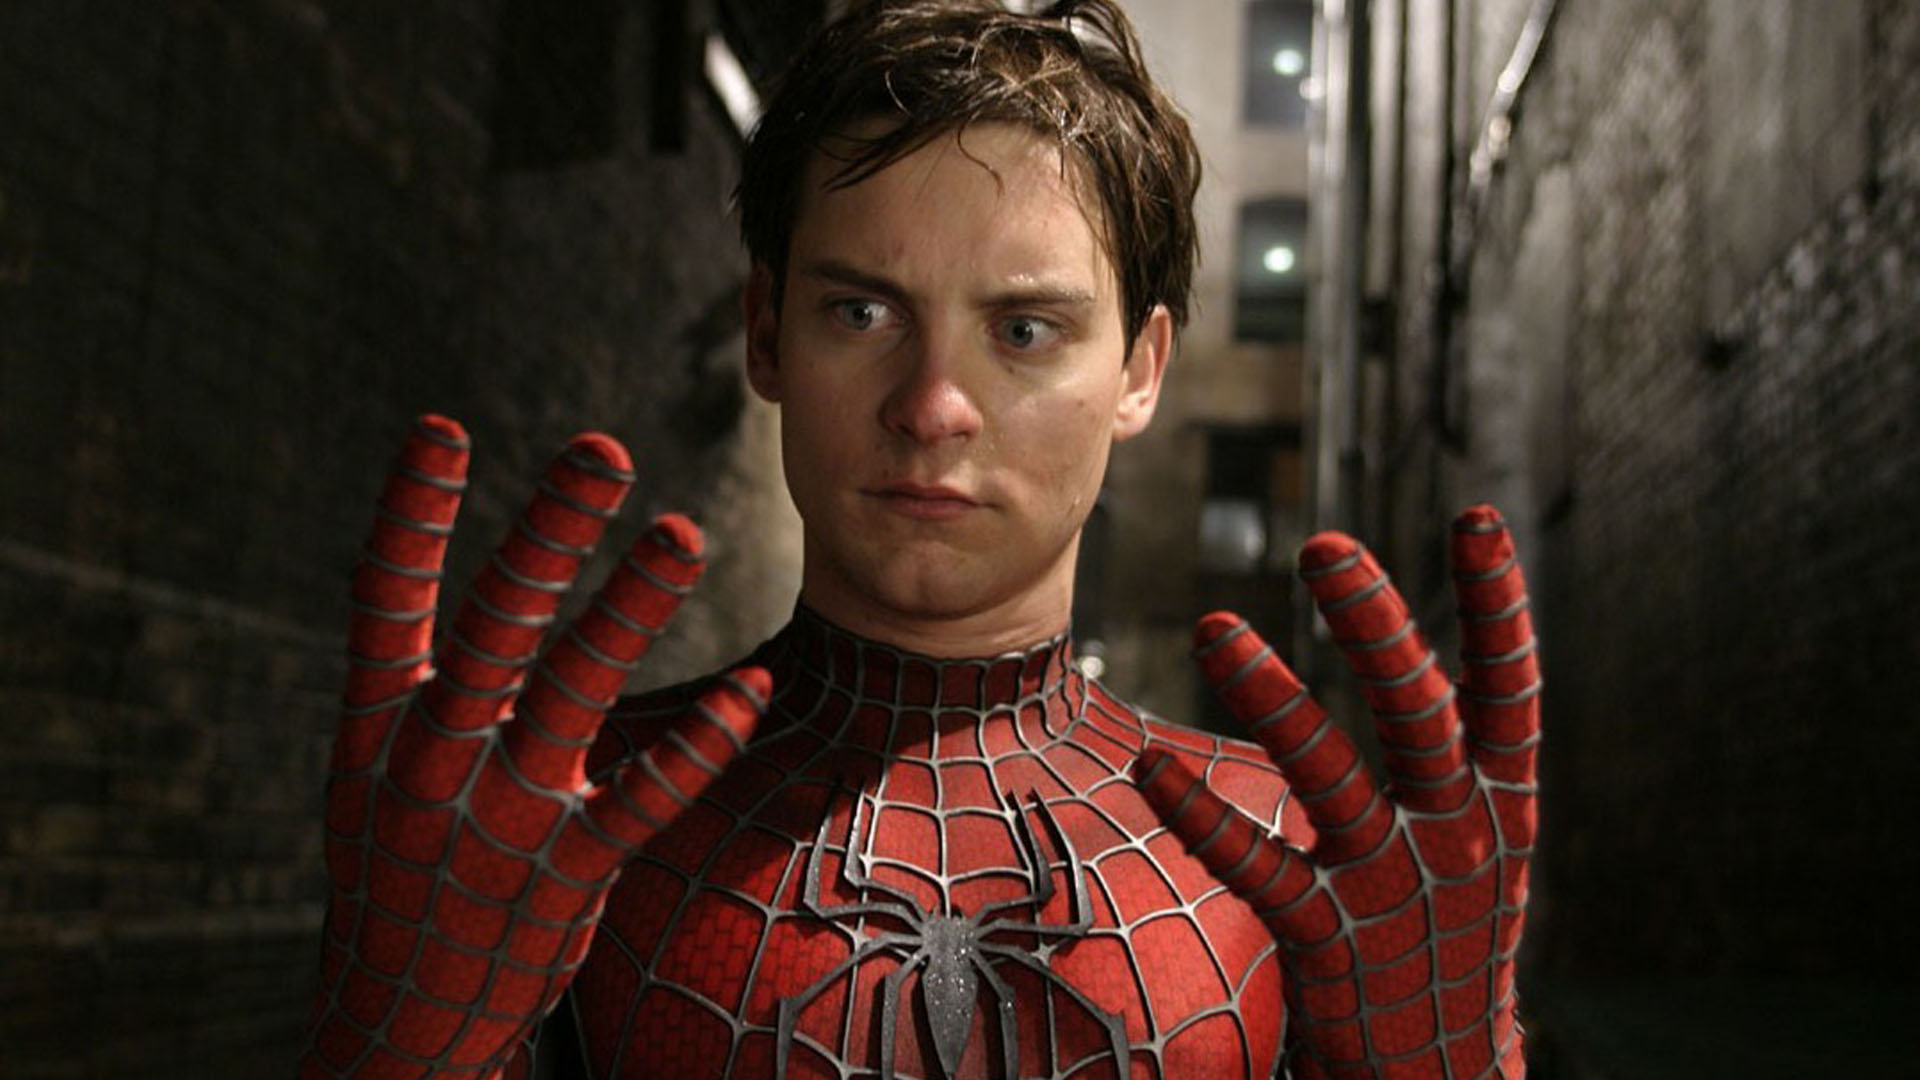 Tobey Maguire is playing Charlie Chaplin in Damien Chazelle’s Babylon